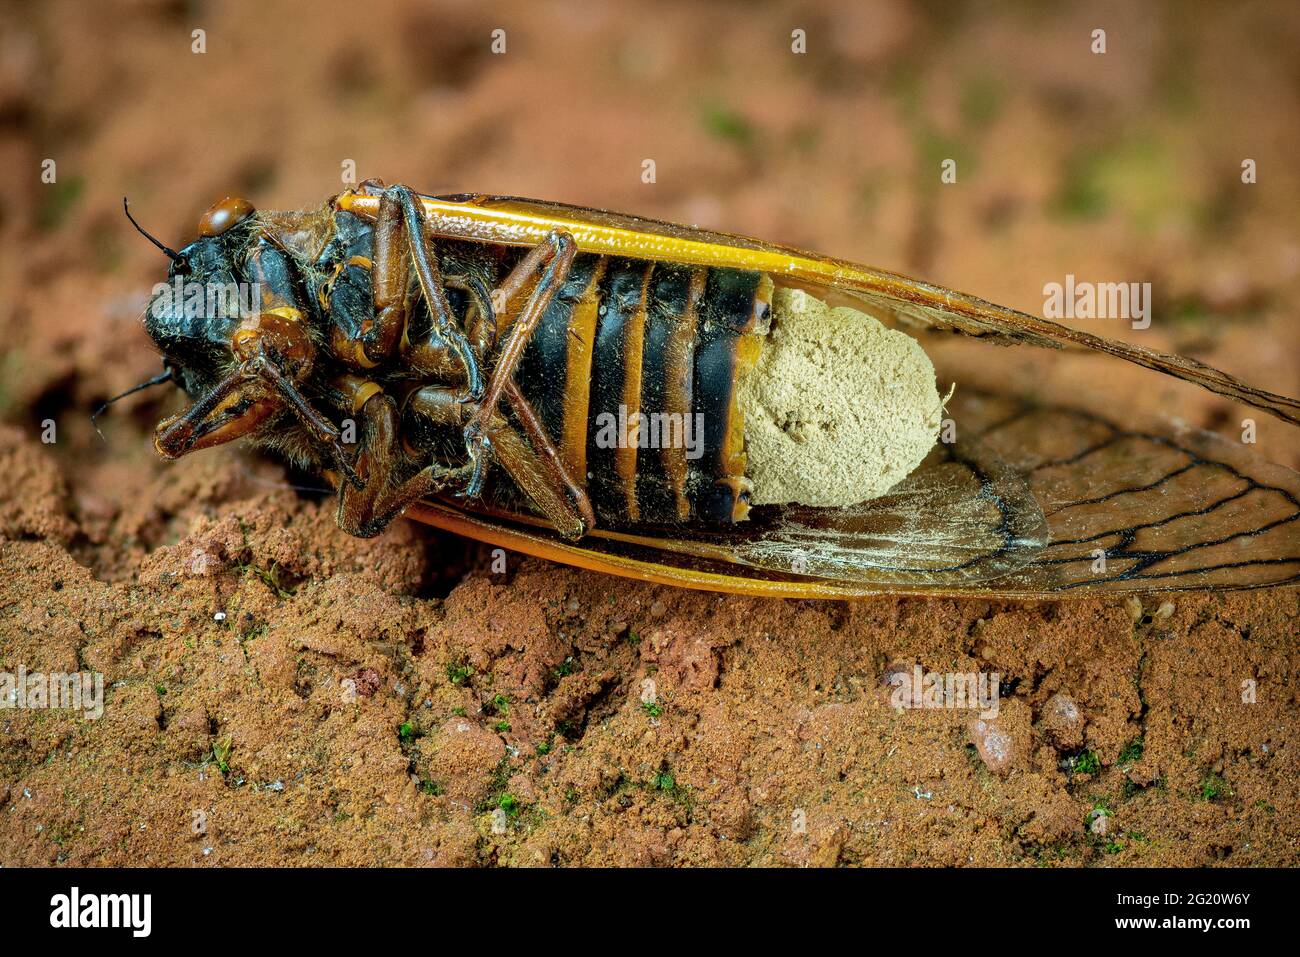 17-year cicada (Magicicada sp.) killed by fungus (Massospora cicadina) that infects the insect and stimulates it to mate vigorously, further spreading Stock Photo